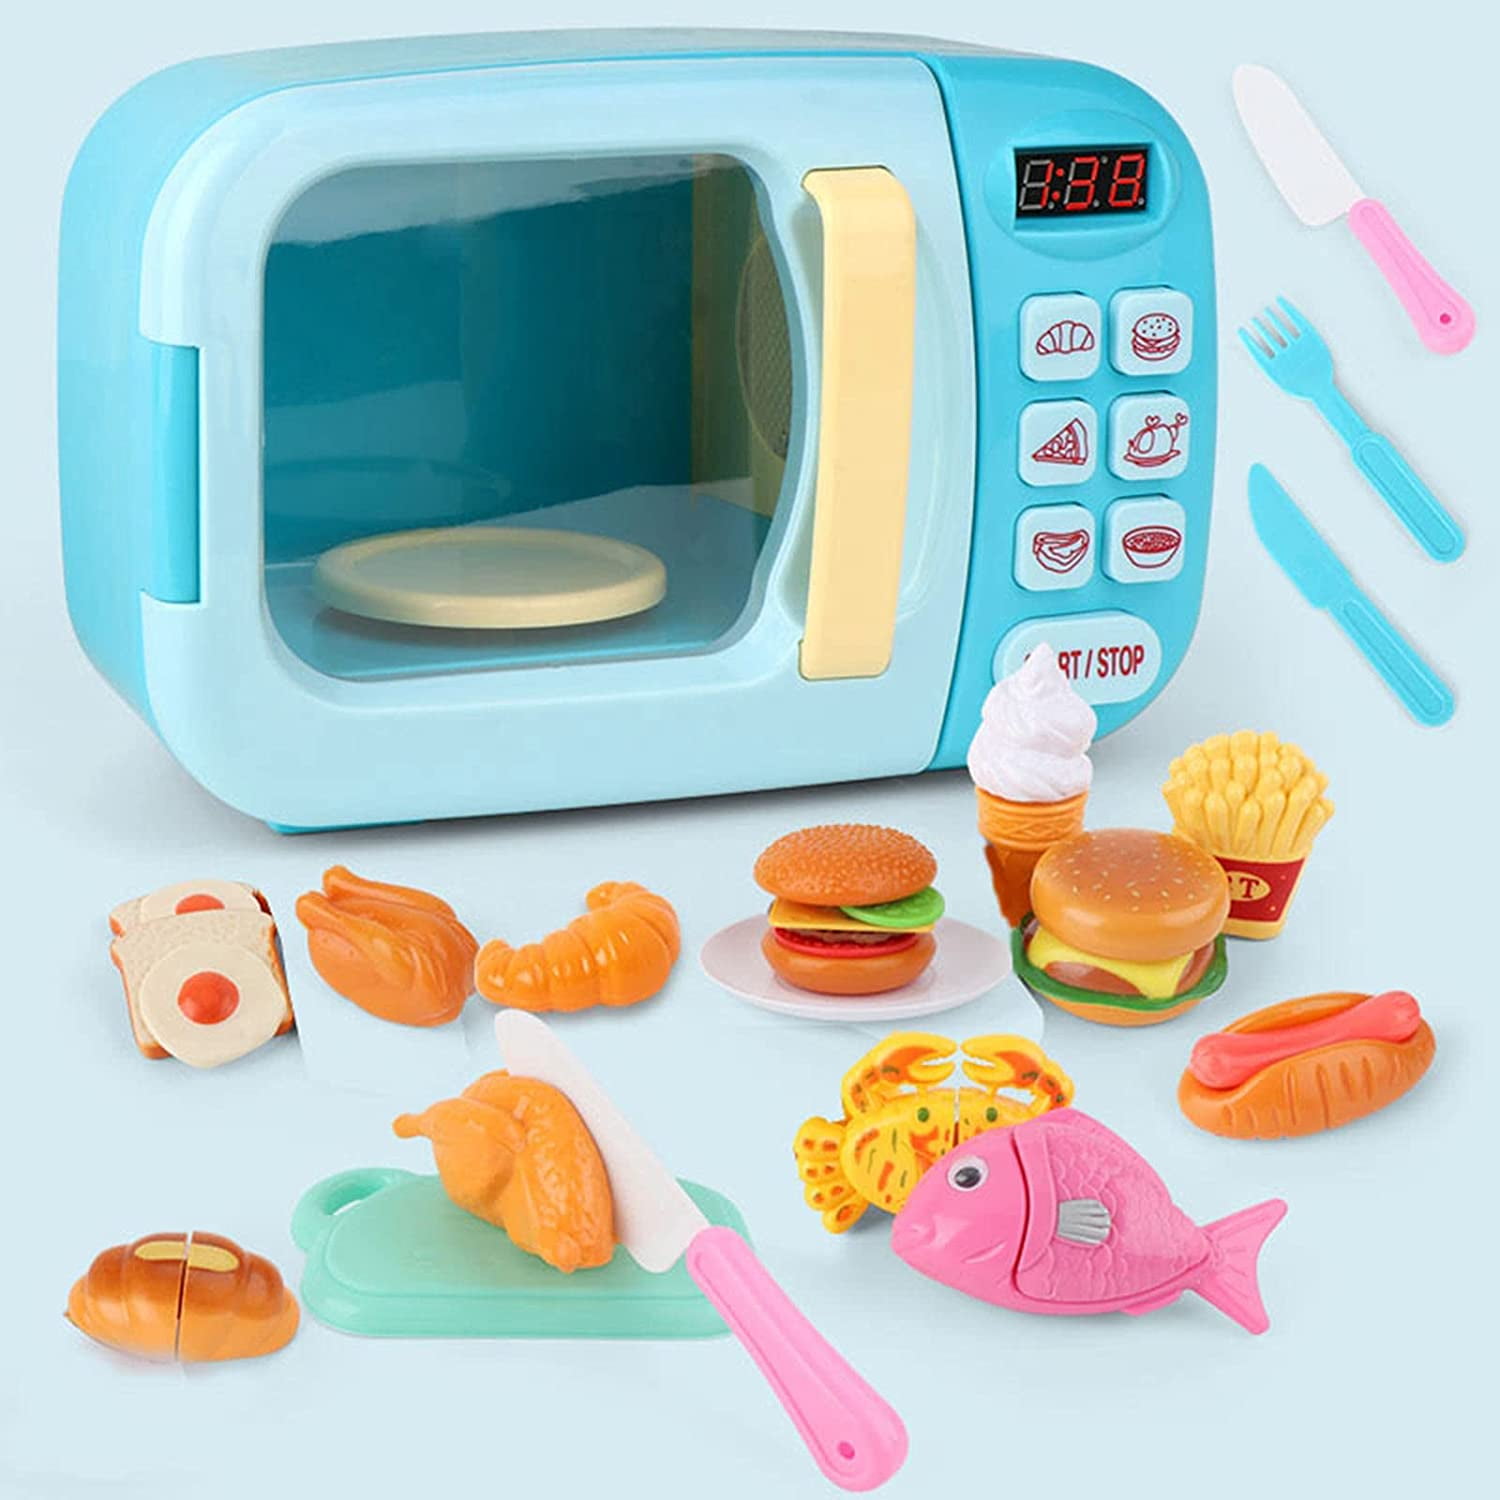 Pretend Kitchen Playset Play Cooking Microwave Food Set Toys for Kids Girls Gift 